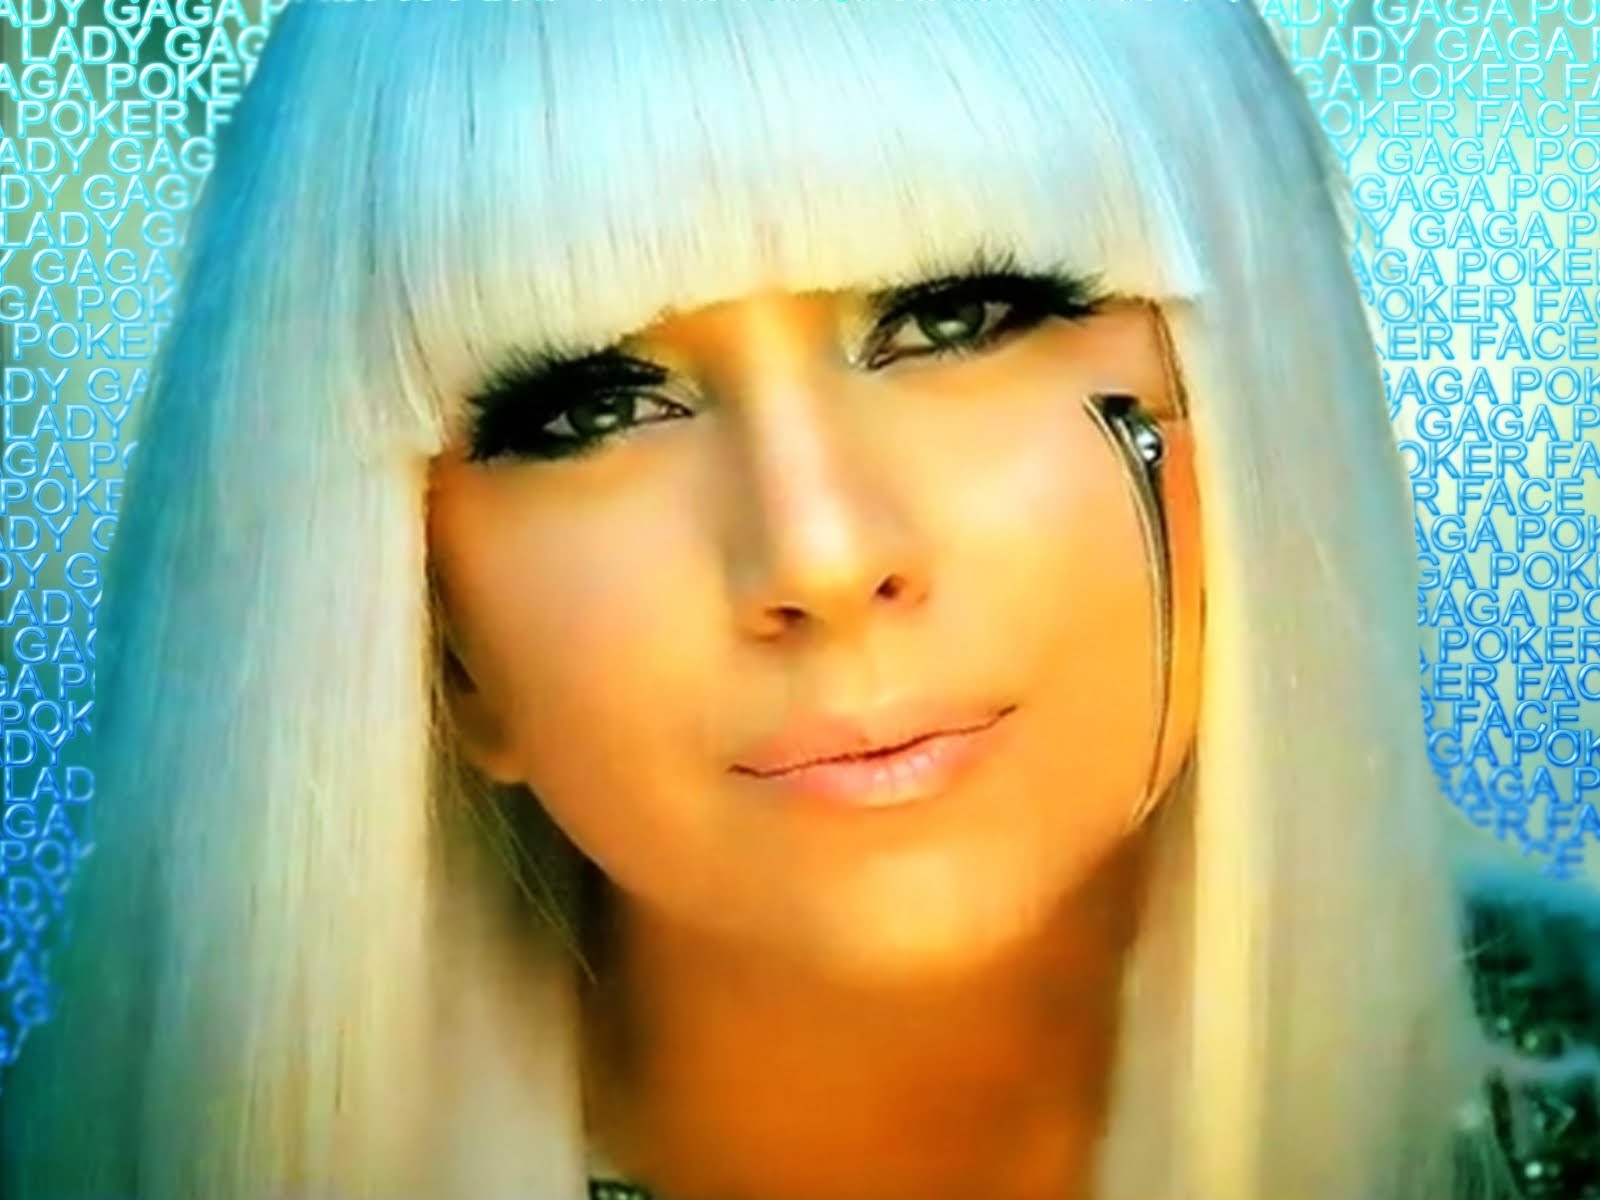 9. "Lady Gaga's Blue Hair: See Her Bold New Look!" - wide 3